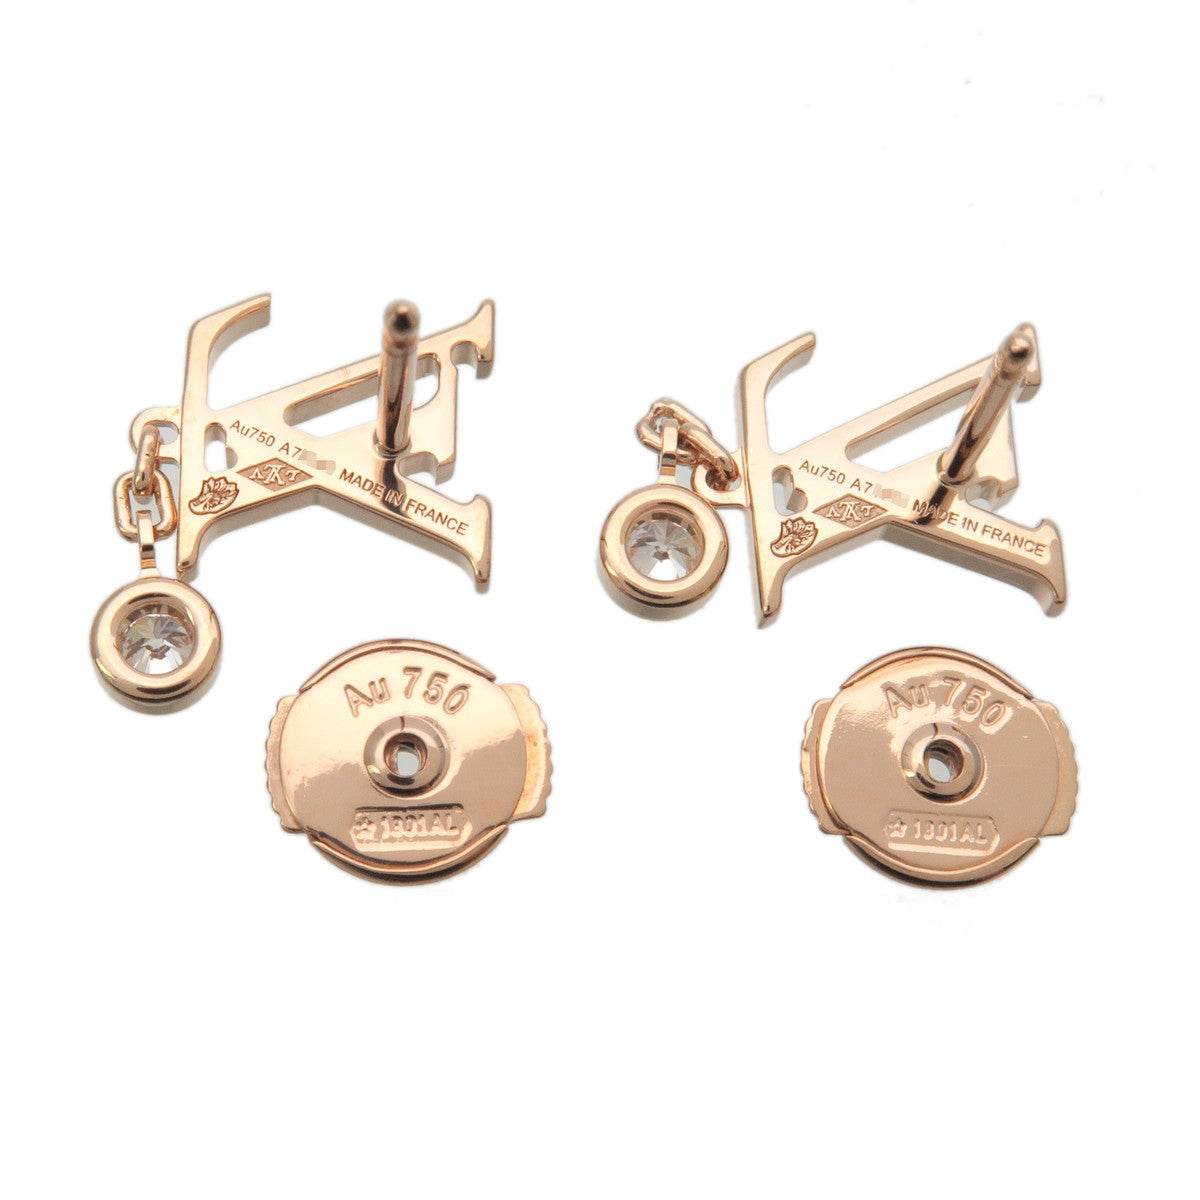 Products by Louis Vuitton: Idylle Blossom Studs, 3 Golds And